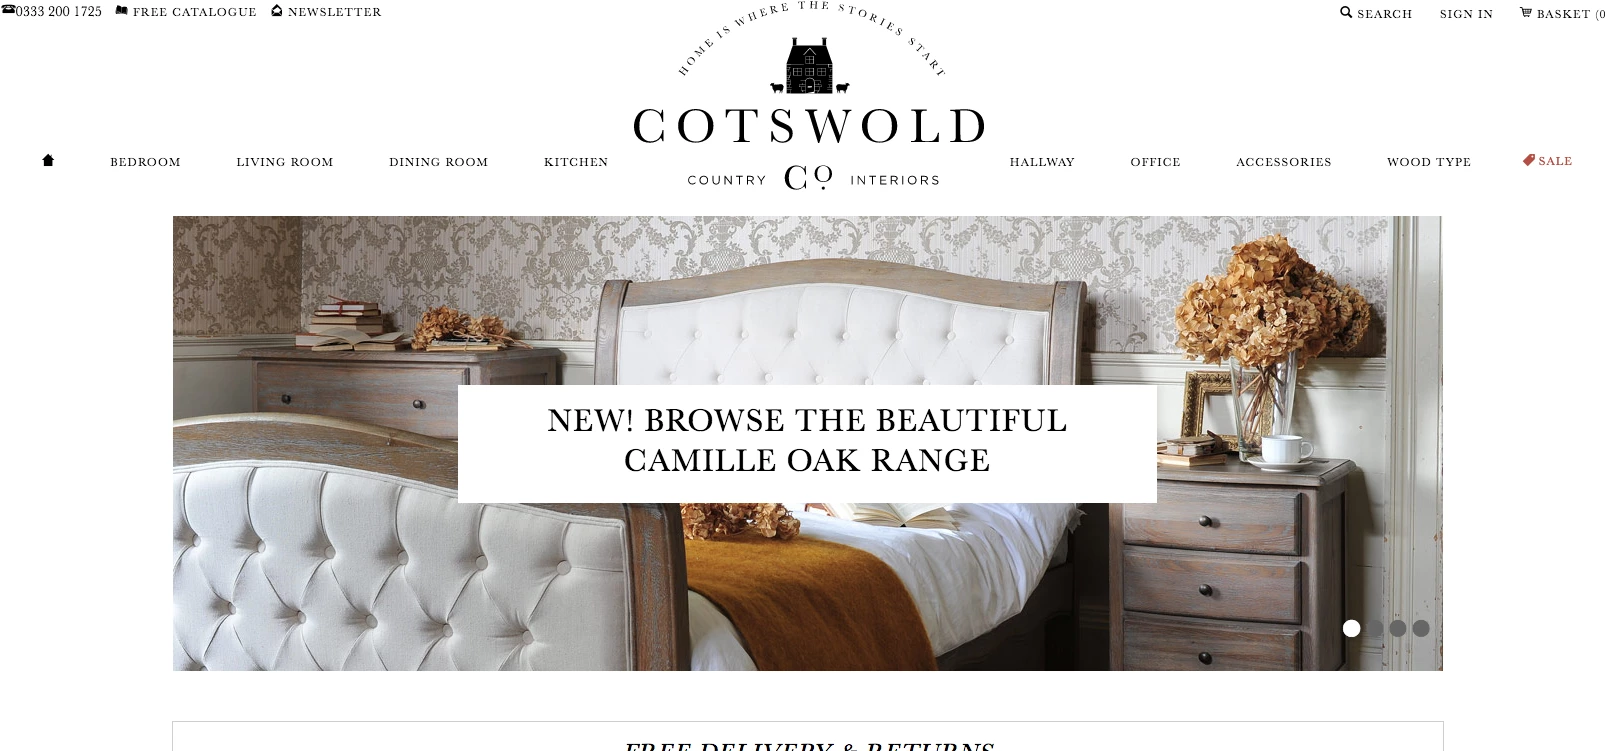 Homepage of the Cotswold Company, which has just been acquired by True Capital.